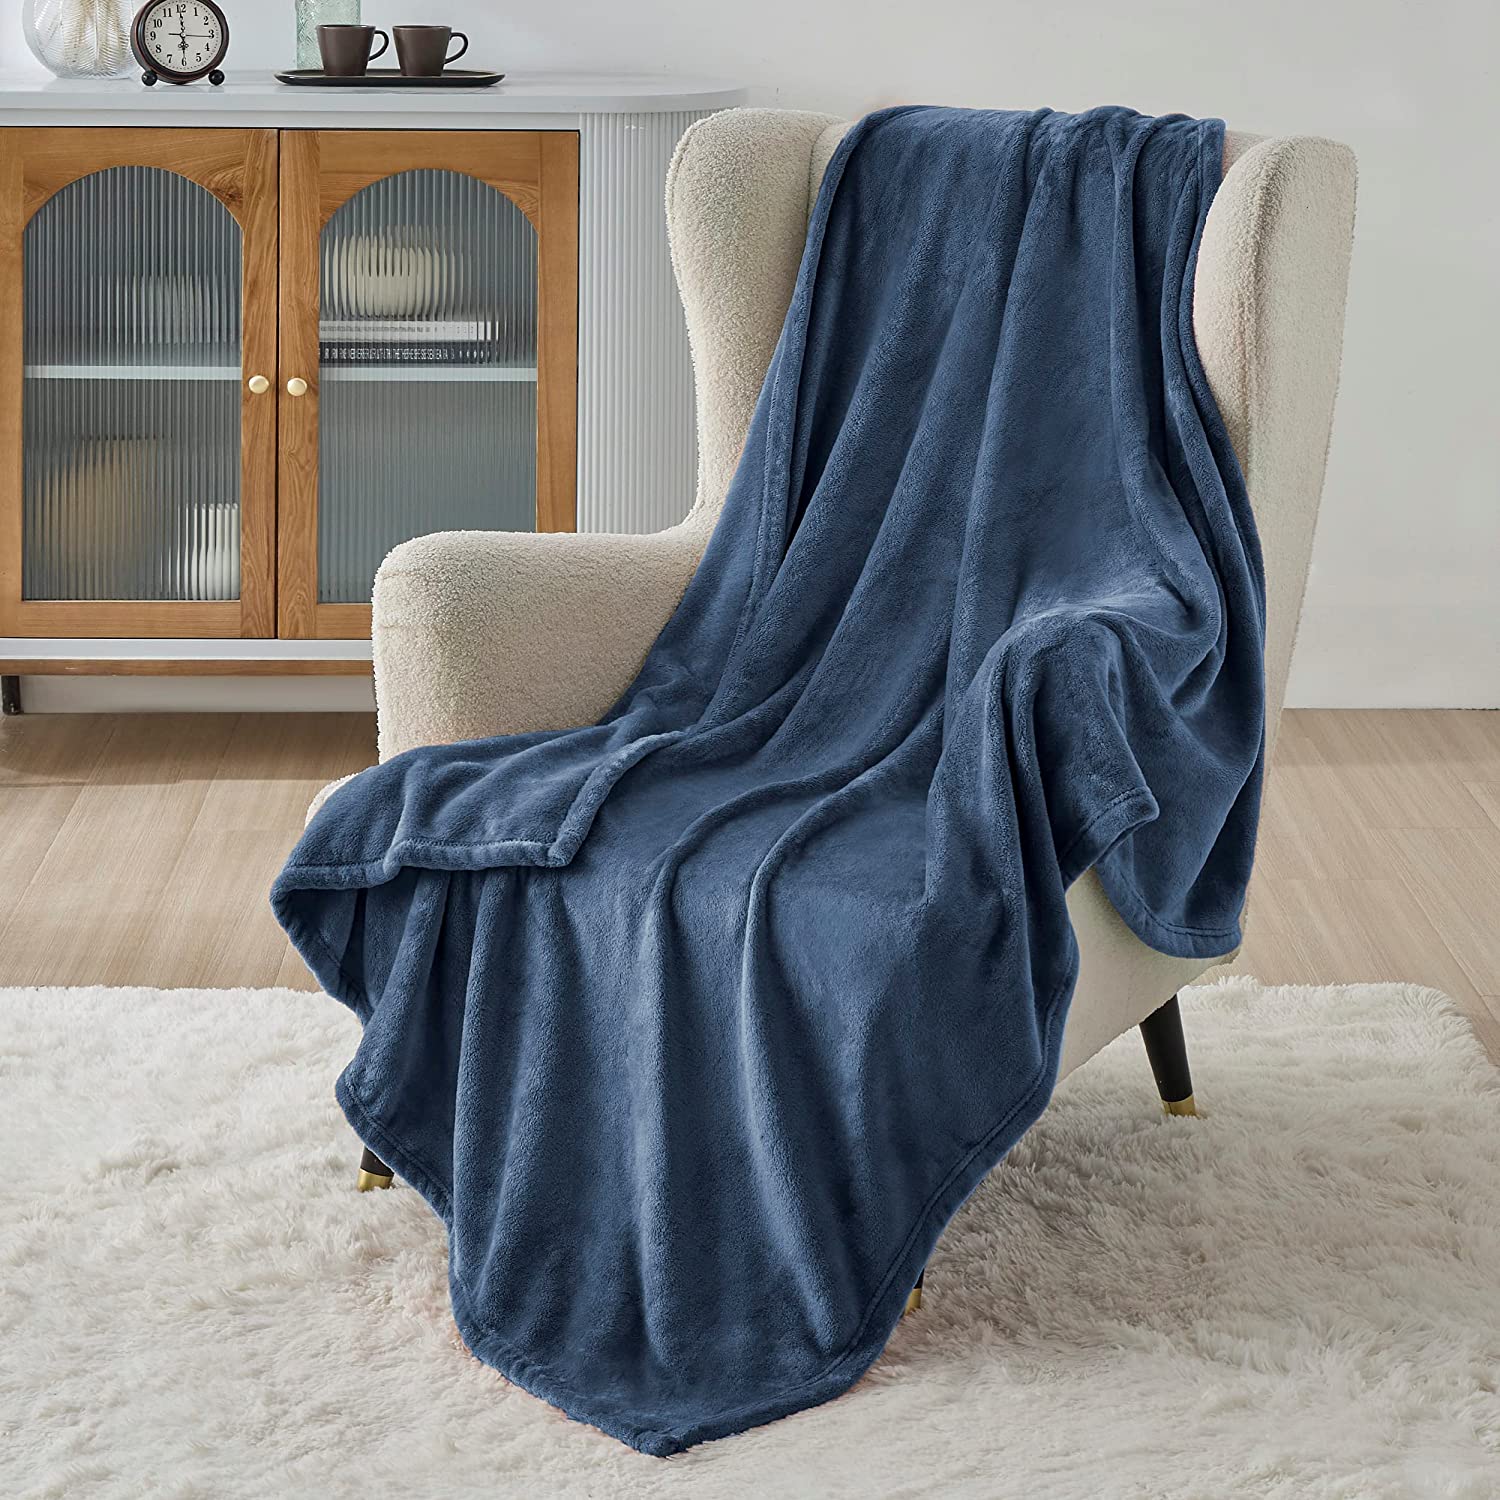 BEDSURE Fleece Throw Blanket for Couch Grey - Lightweight Plush Fuzzy Cozy  Soft